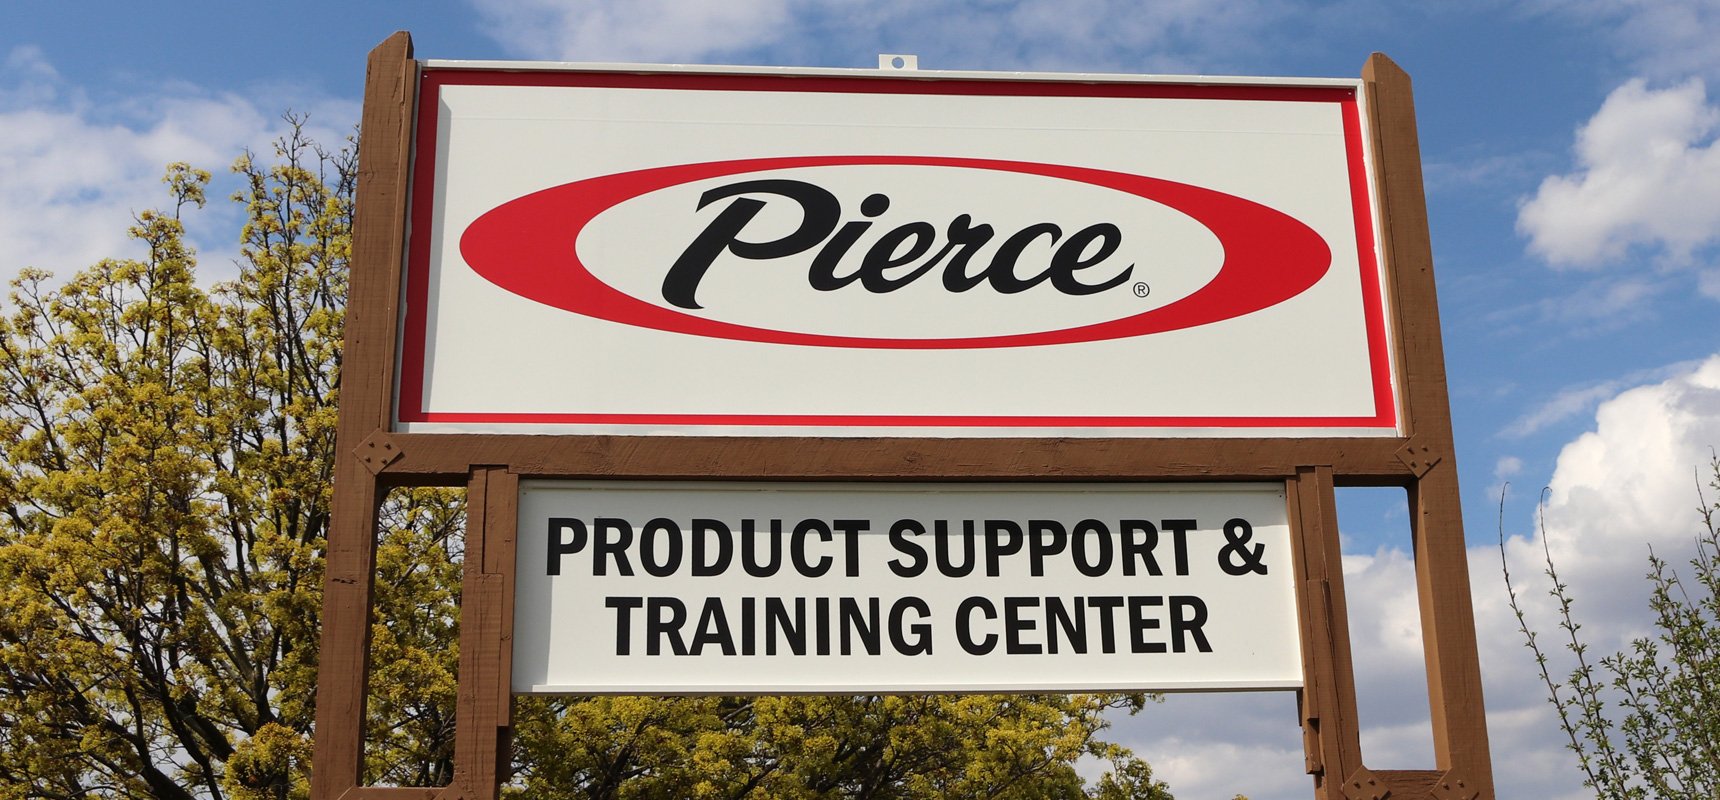 Pierce-Product-Support-Training-Center-banner